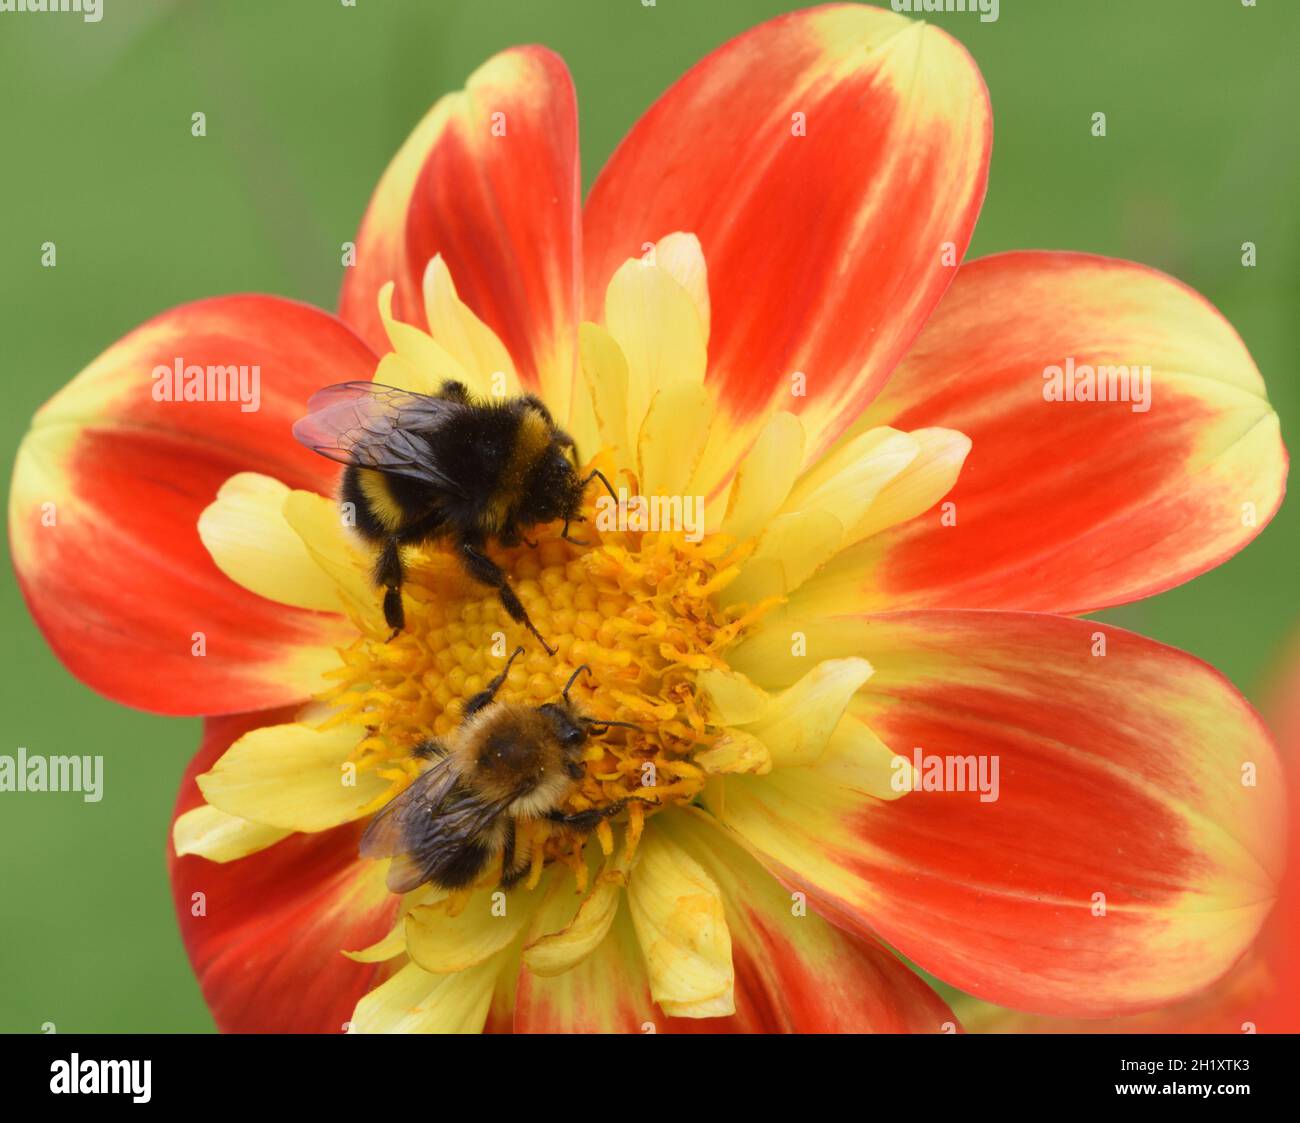 A buff-tailed bumblebee or large earth bumblebee (Bombus terrestris) and a common carder bee (Bombus pascuorum)  forage for nectar and pollen i Stock Photo